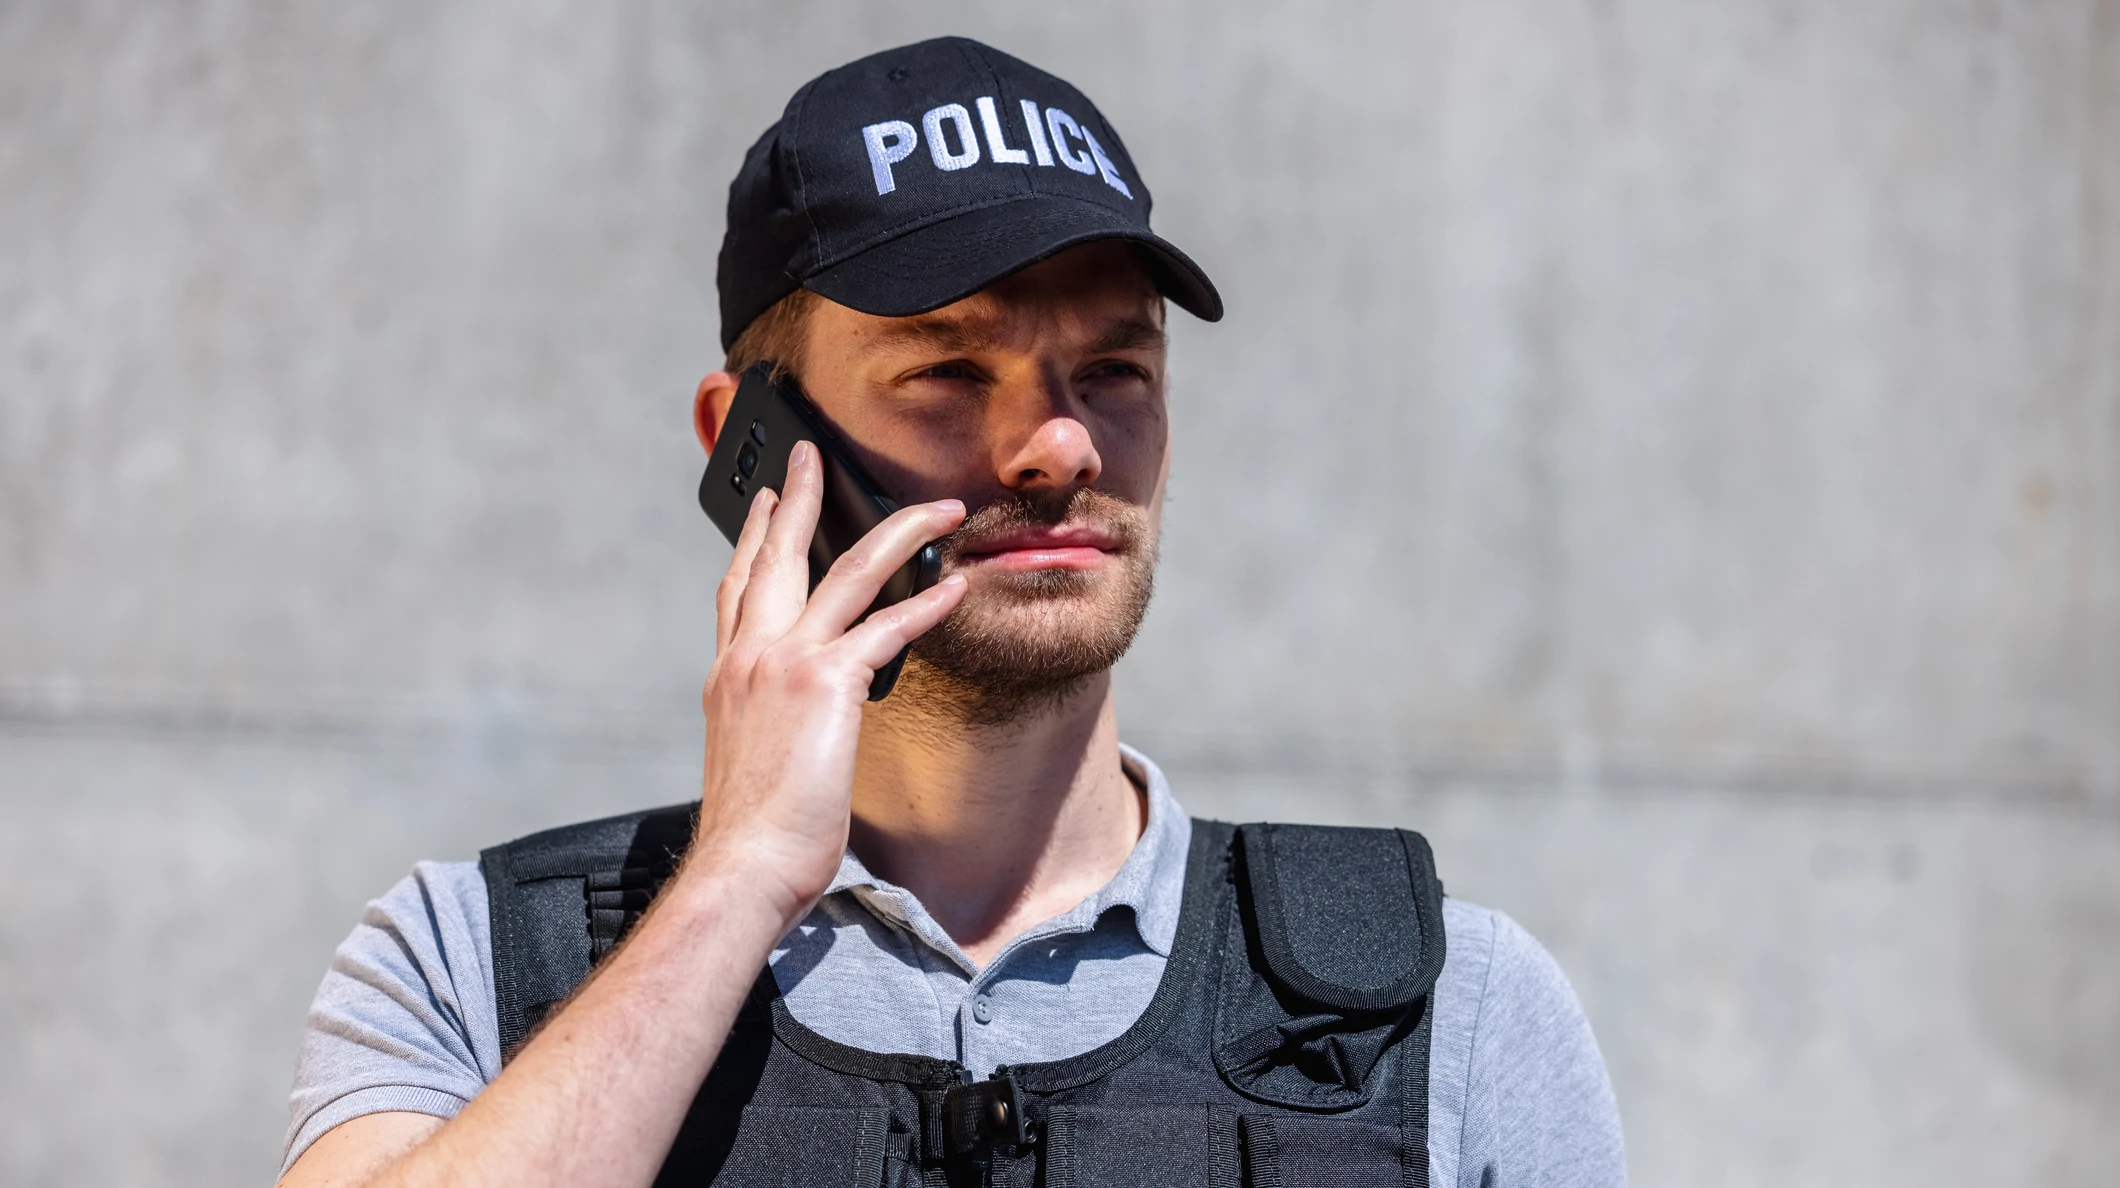 What To Do When the Police Are Calling